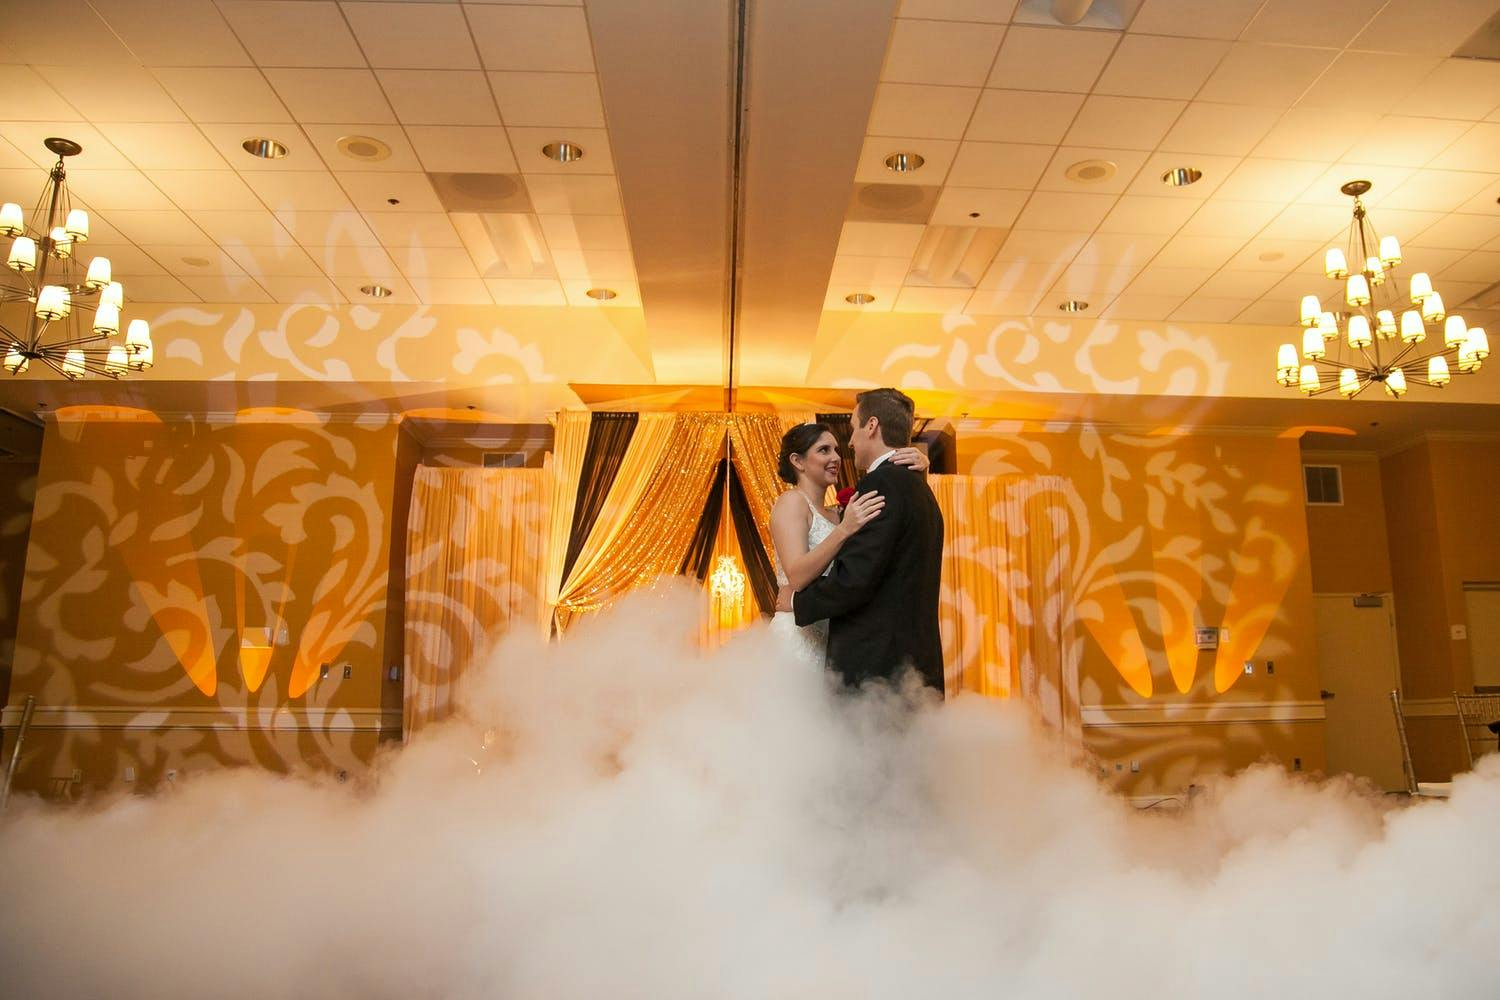 Couple dance in fog with golden paisley-patterned lighting projected behind them | PartySlate